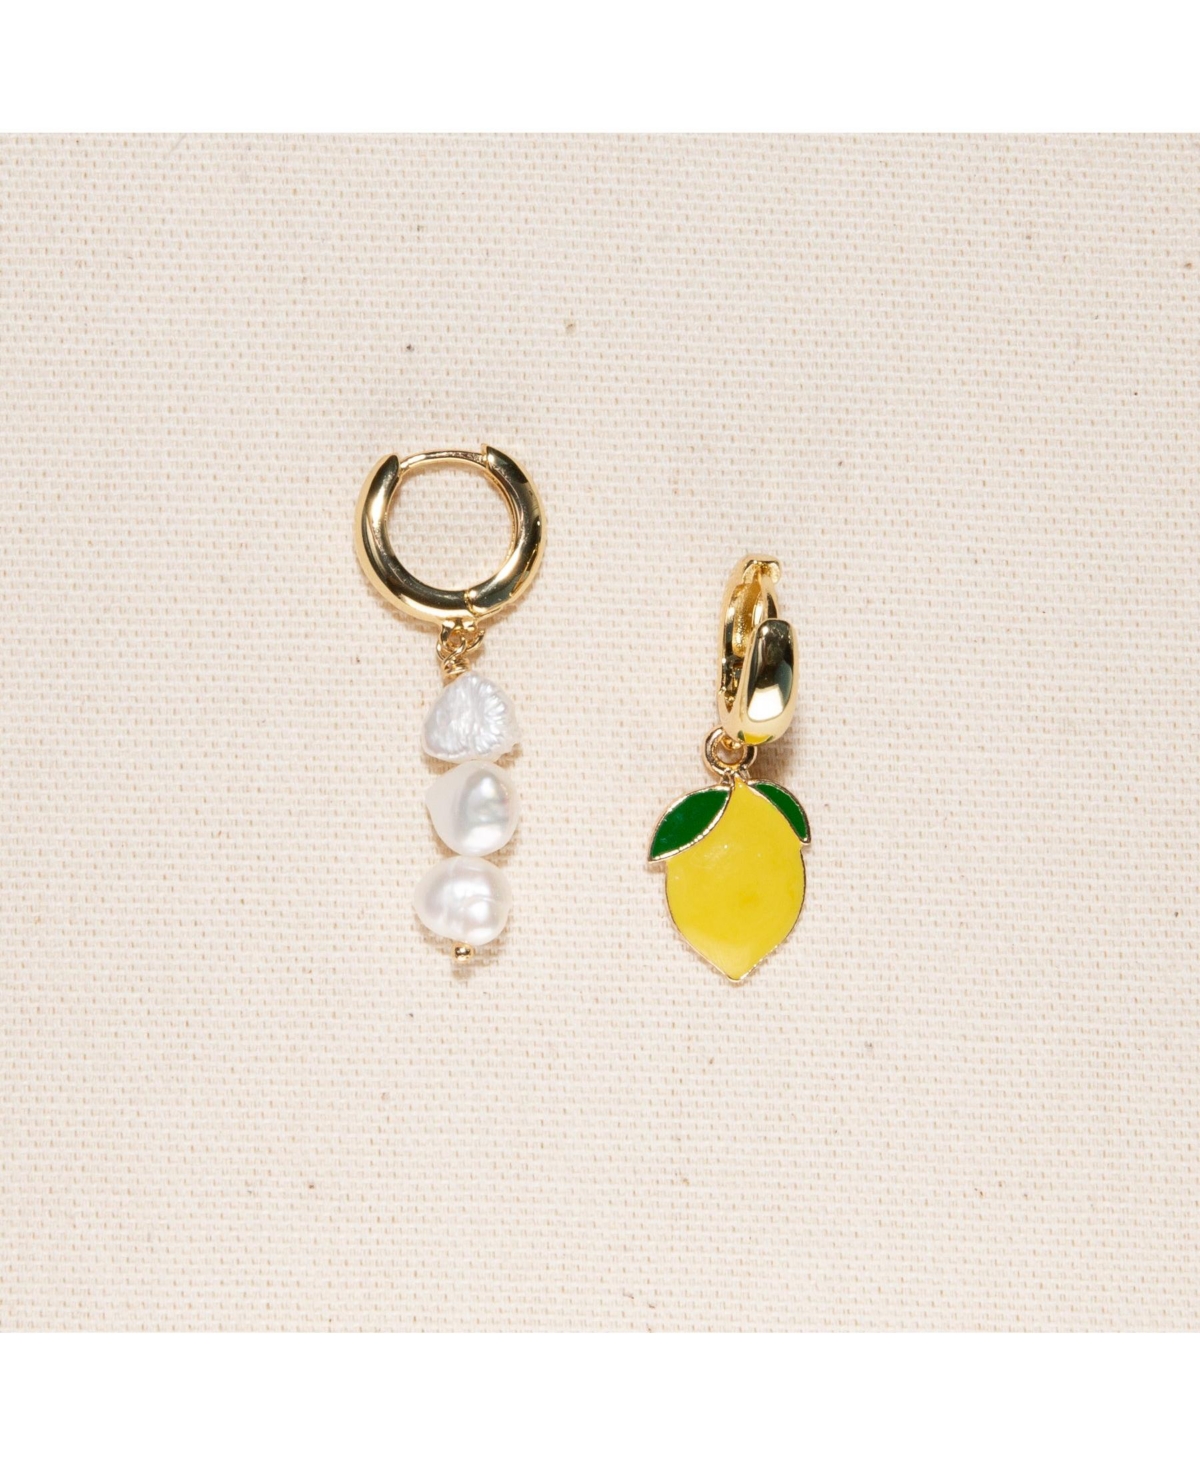 18k Gold Plated Huggies Freshwater Pearls with a Yellow and Green Lemon Charm - Lemonade Earrings For Women - Yellow